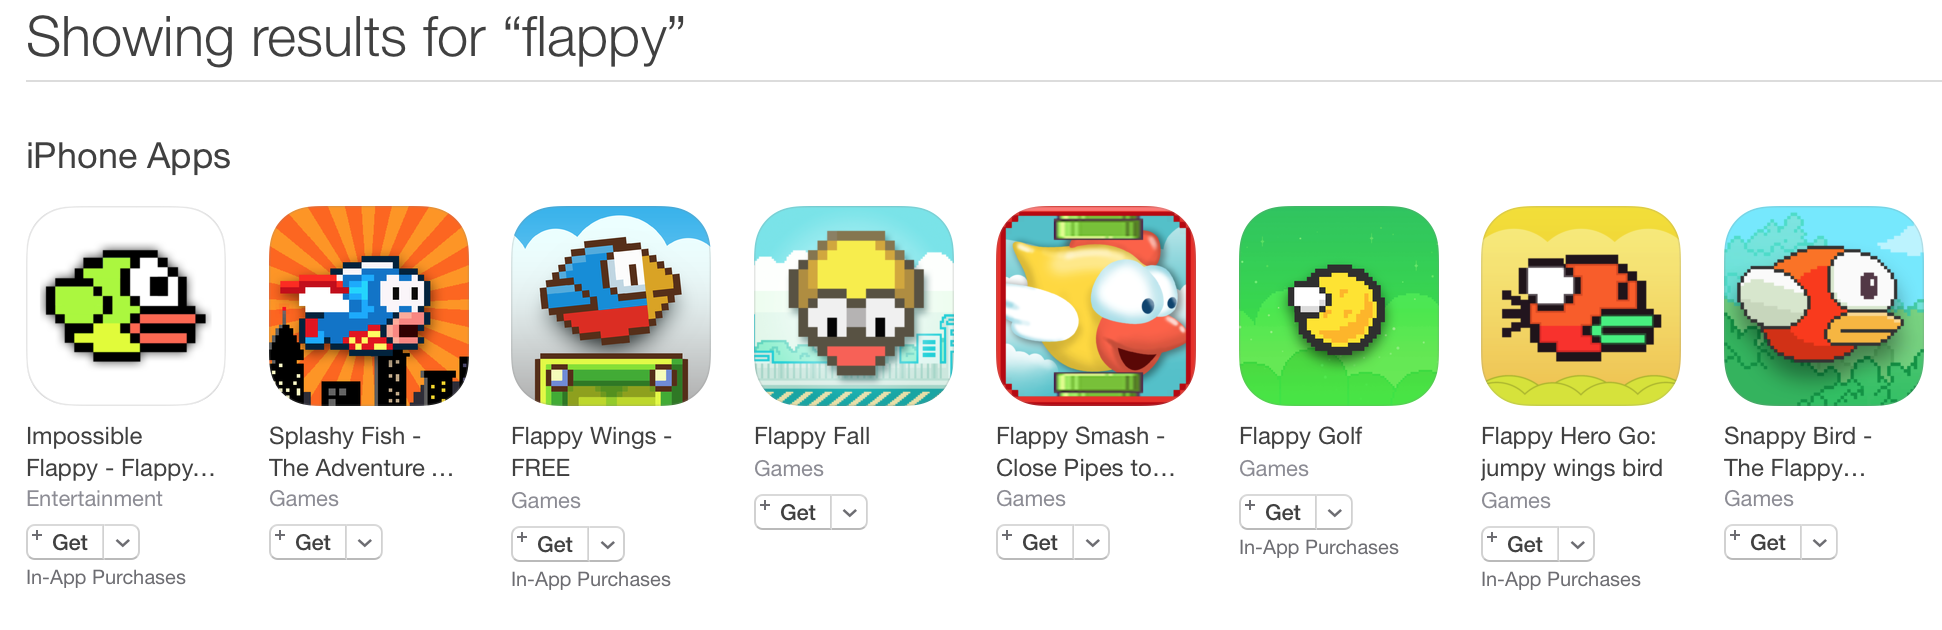 There Many Flappy Clones on the iOS App Store